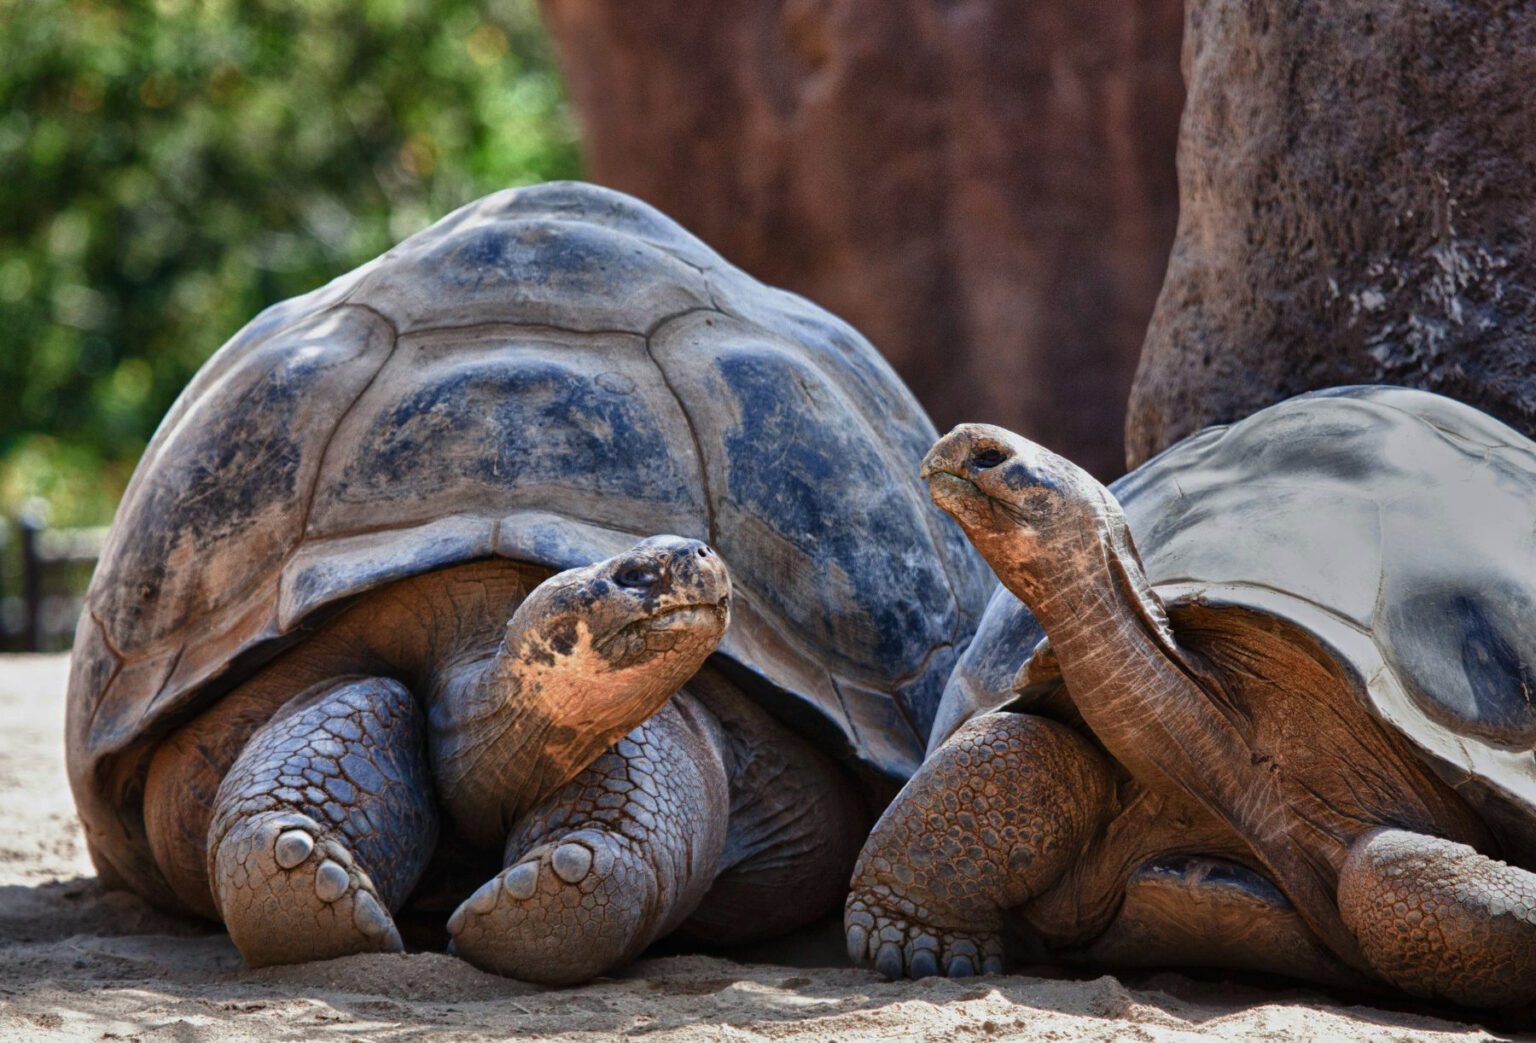 A couple of large turtles laying next to each other.